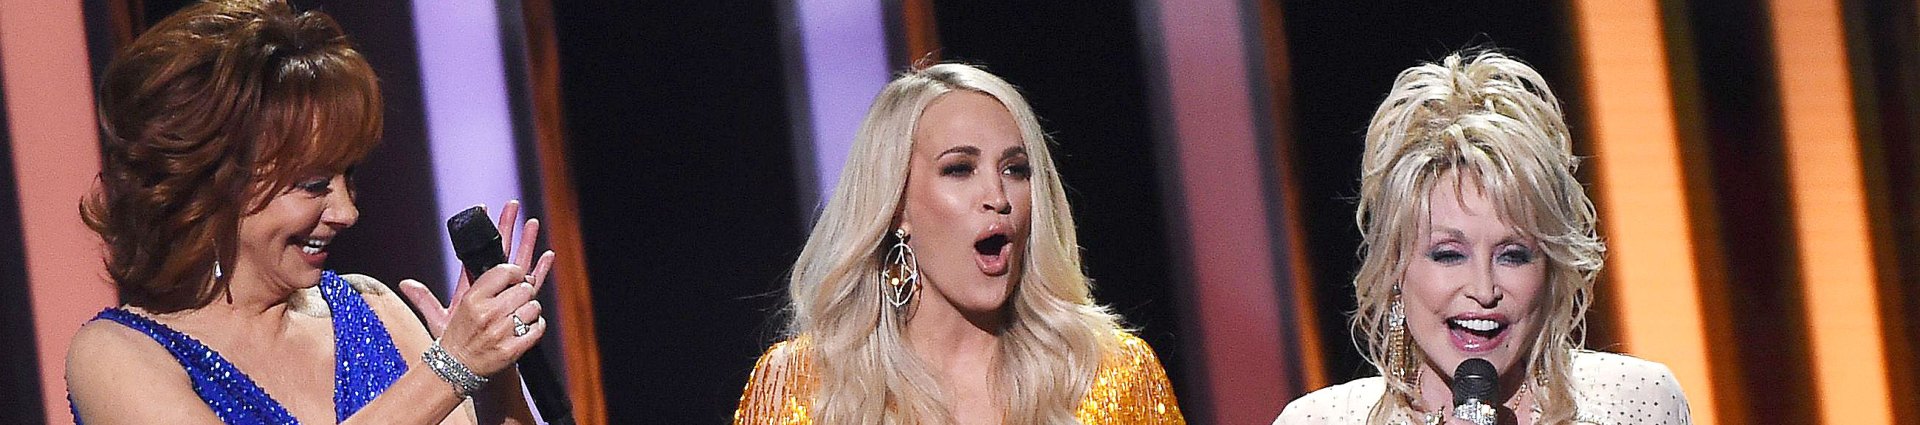 Carrie Underwood Announces Shes Done Hosting the CMAs